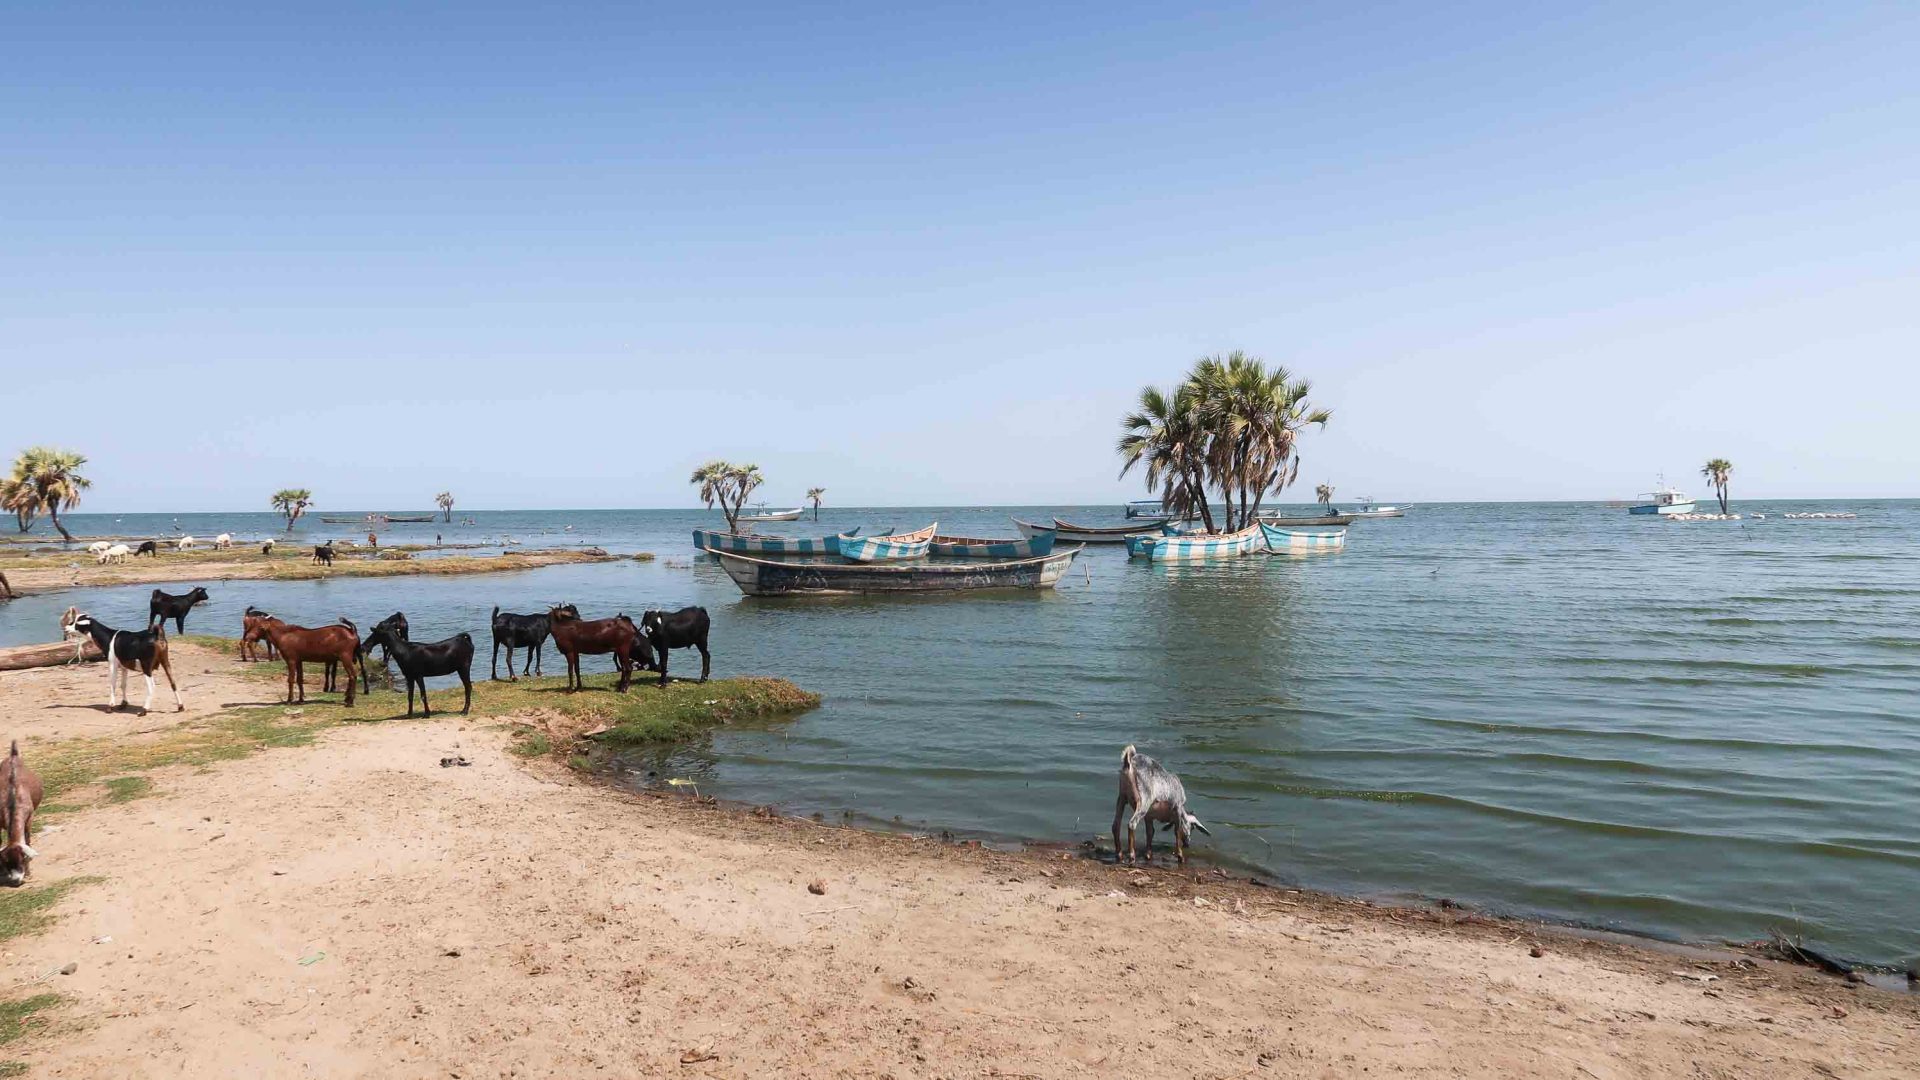 Lake Turkana with goats by the waters edge.